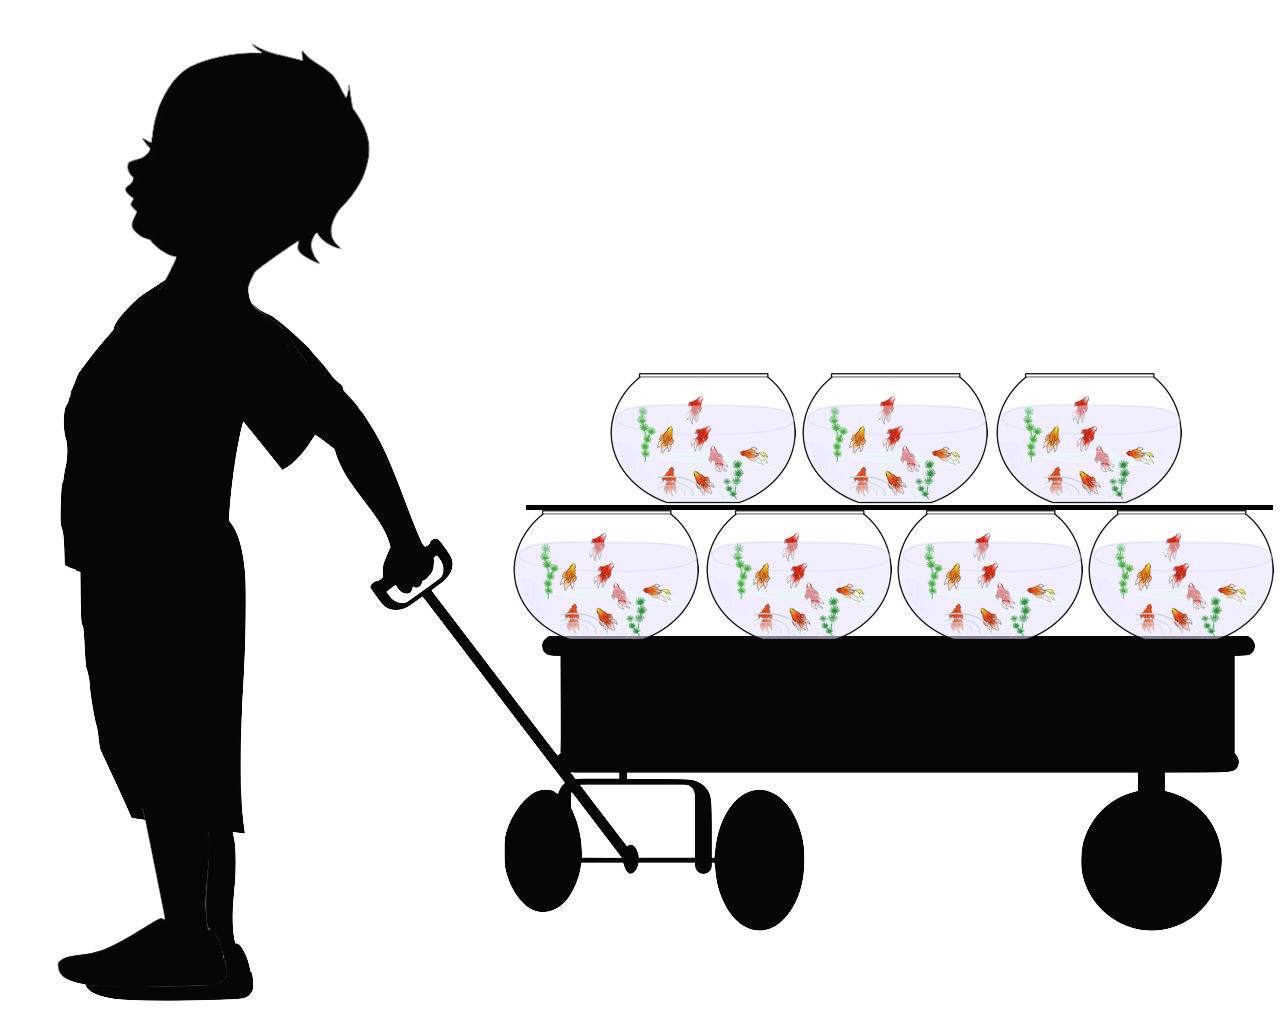 silhouette of child with a wagon containing 7 fish bowls